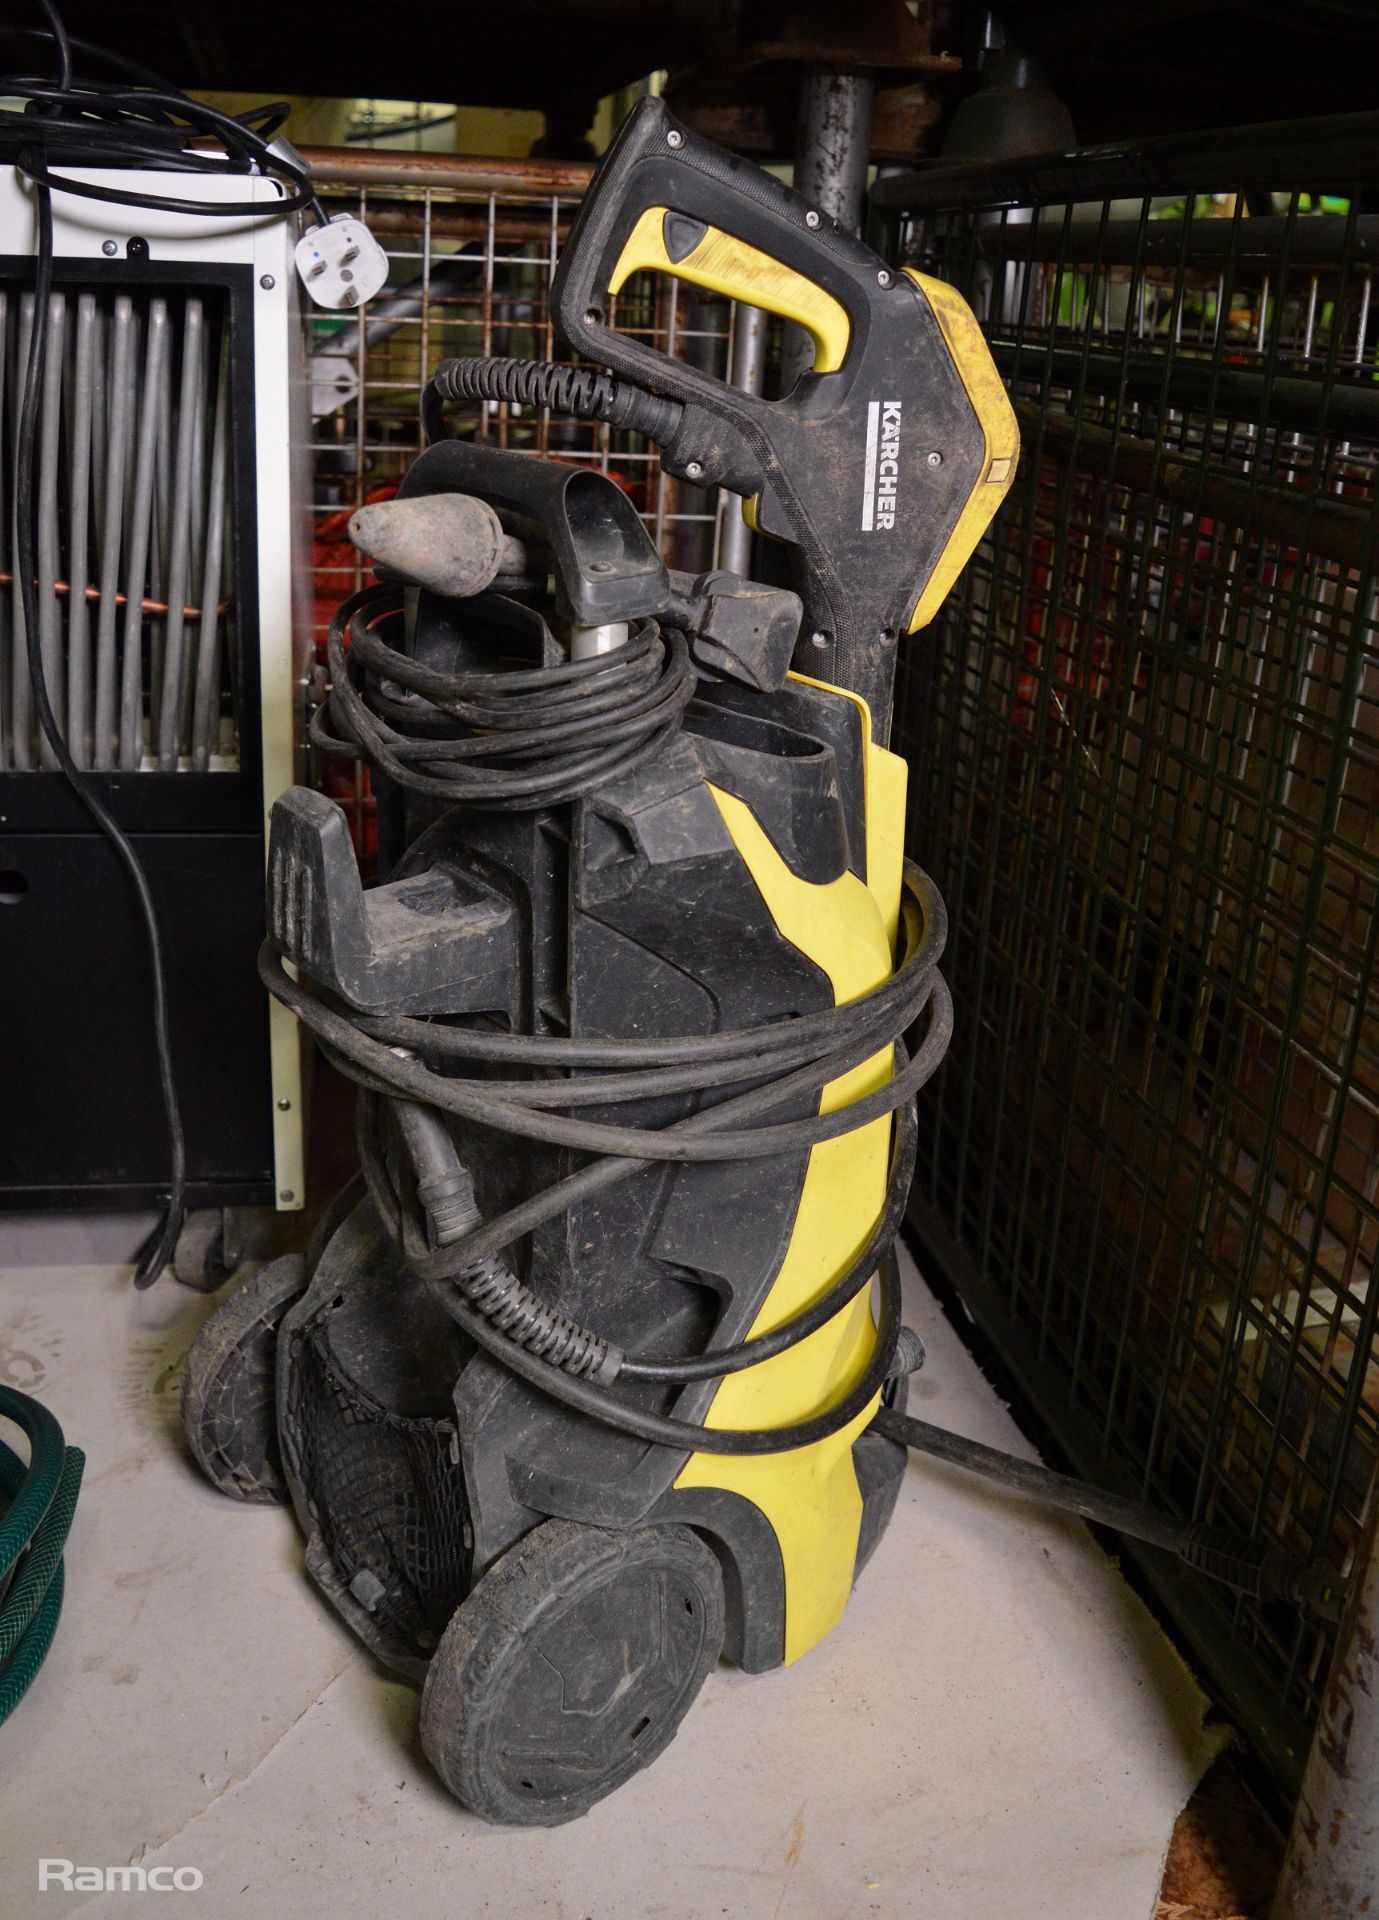 Karcher Patio Cleaning Head Attachment, 2x Karcher K4 Full Control Pressure Washers - Image 11 of 12